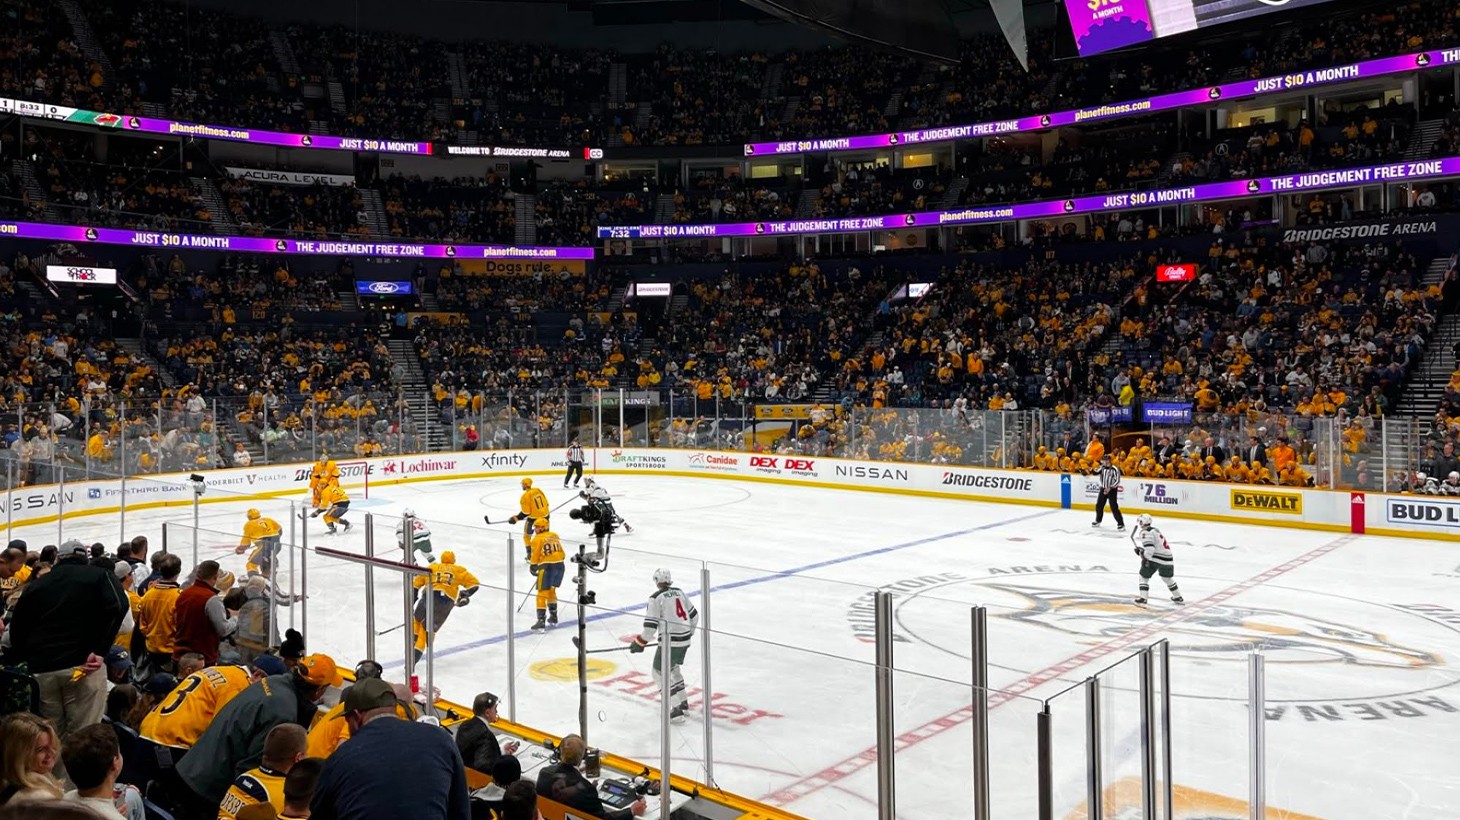 The Bridgestone Arena - Home of the greatest NHL team in the